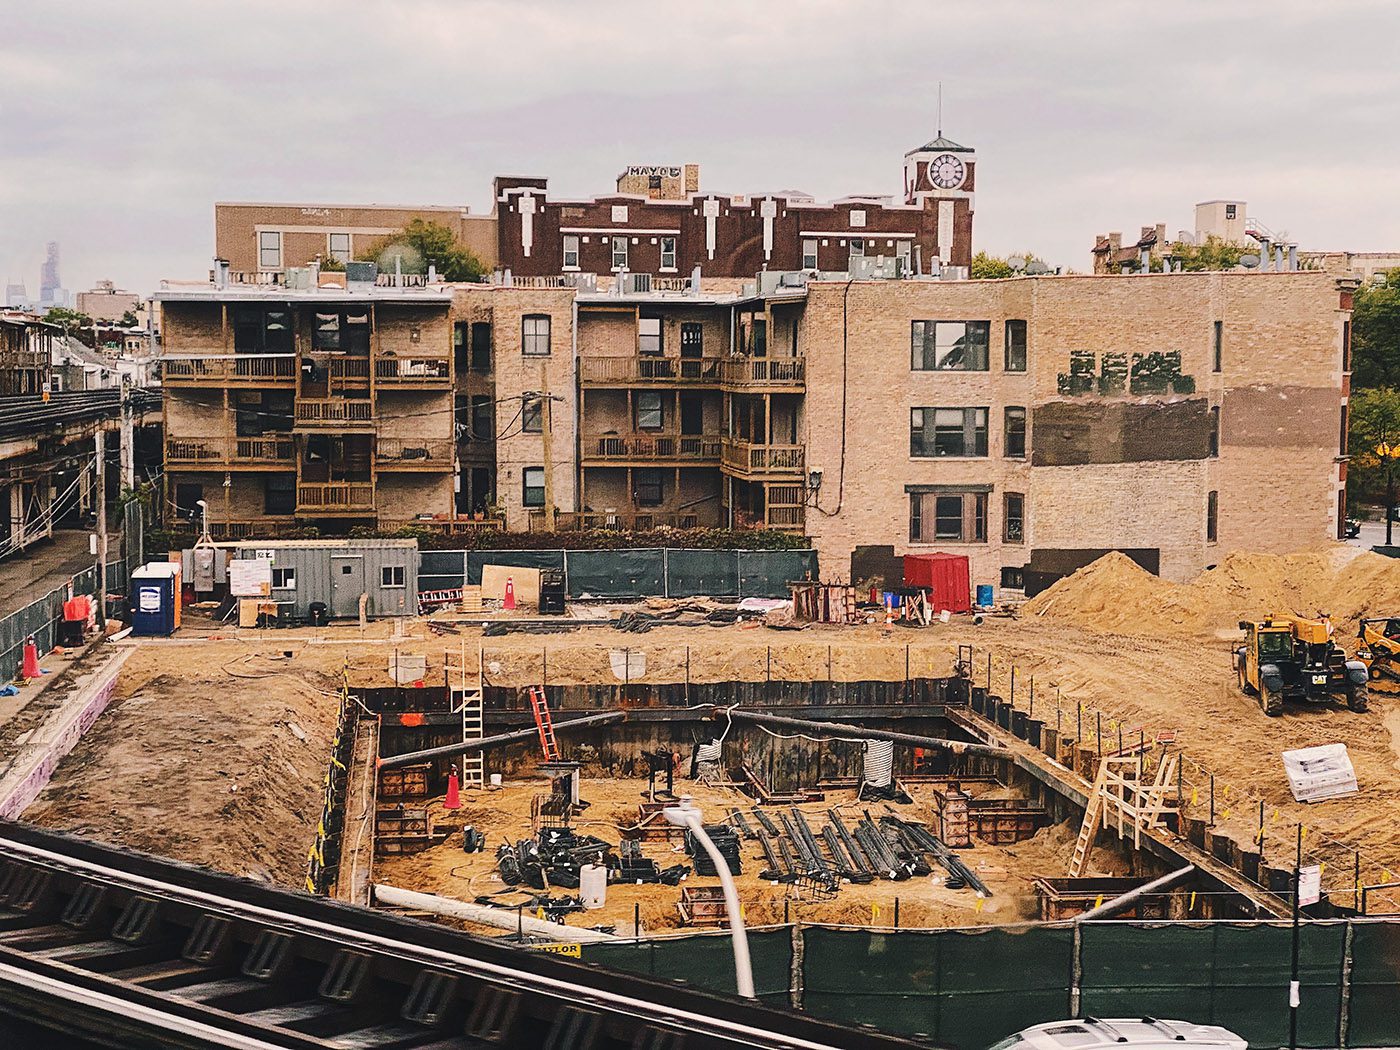 A view of the construction site of the Wrigleyville Lofts in Chicago's Lakeview neighborhood